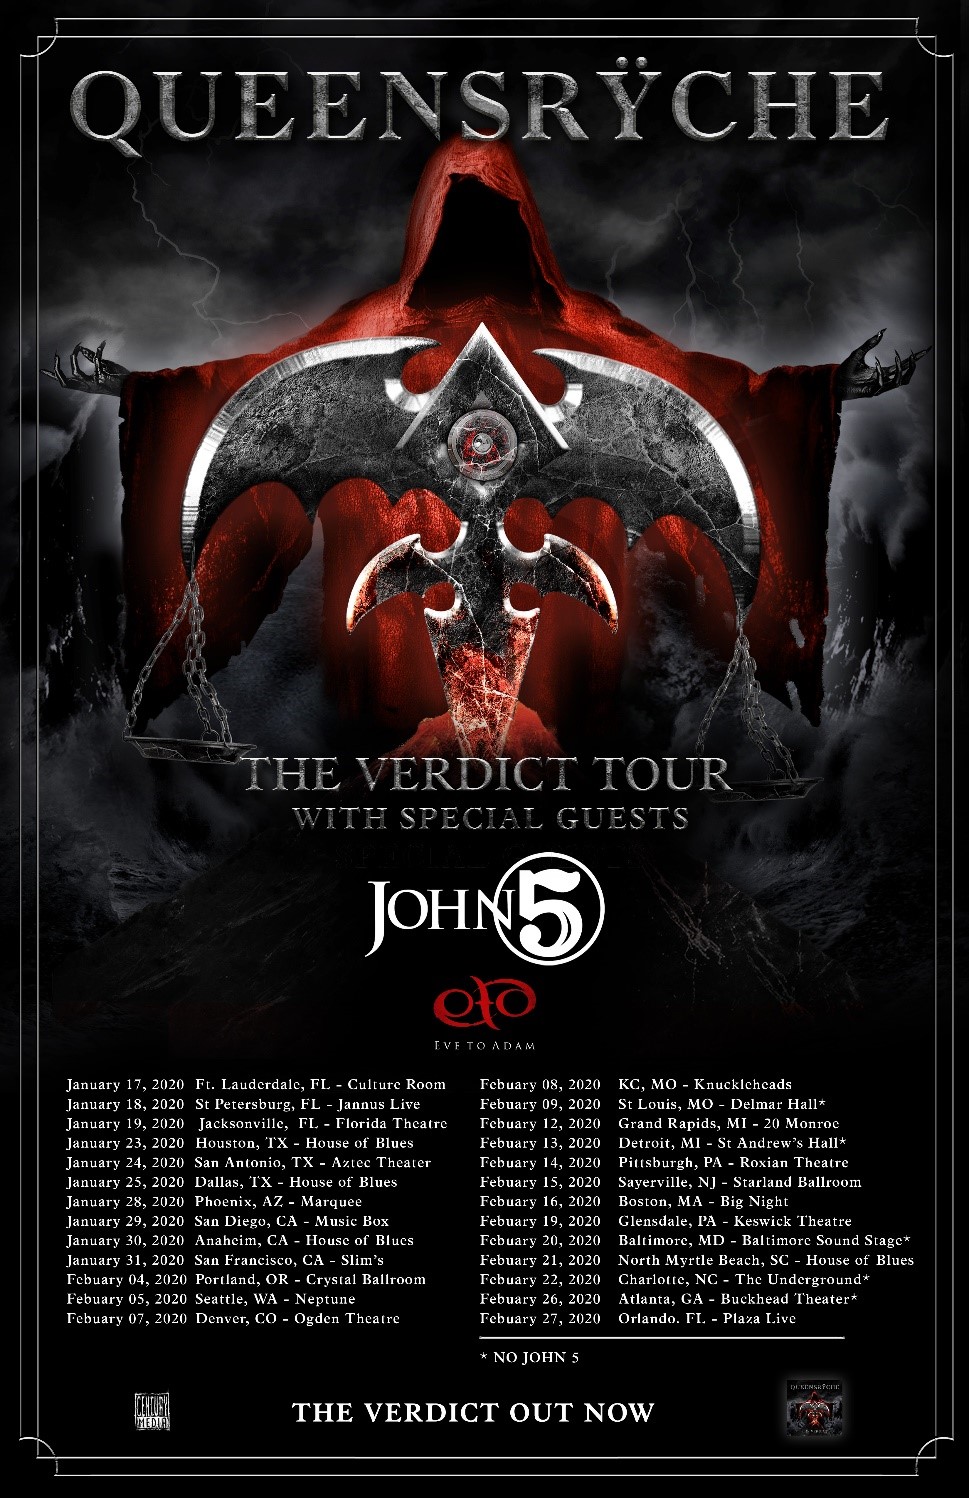 QUEENSRYCHE ANNOUNCES U.S. HEADLINE TOUR WITH SUPPORT FROM JOHN 5 AND EVE TO ADAM